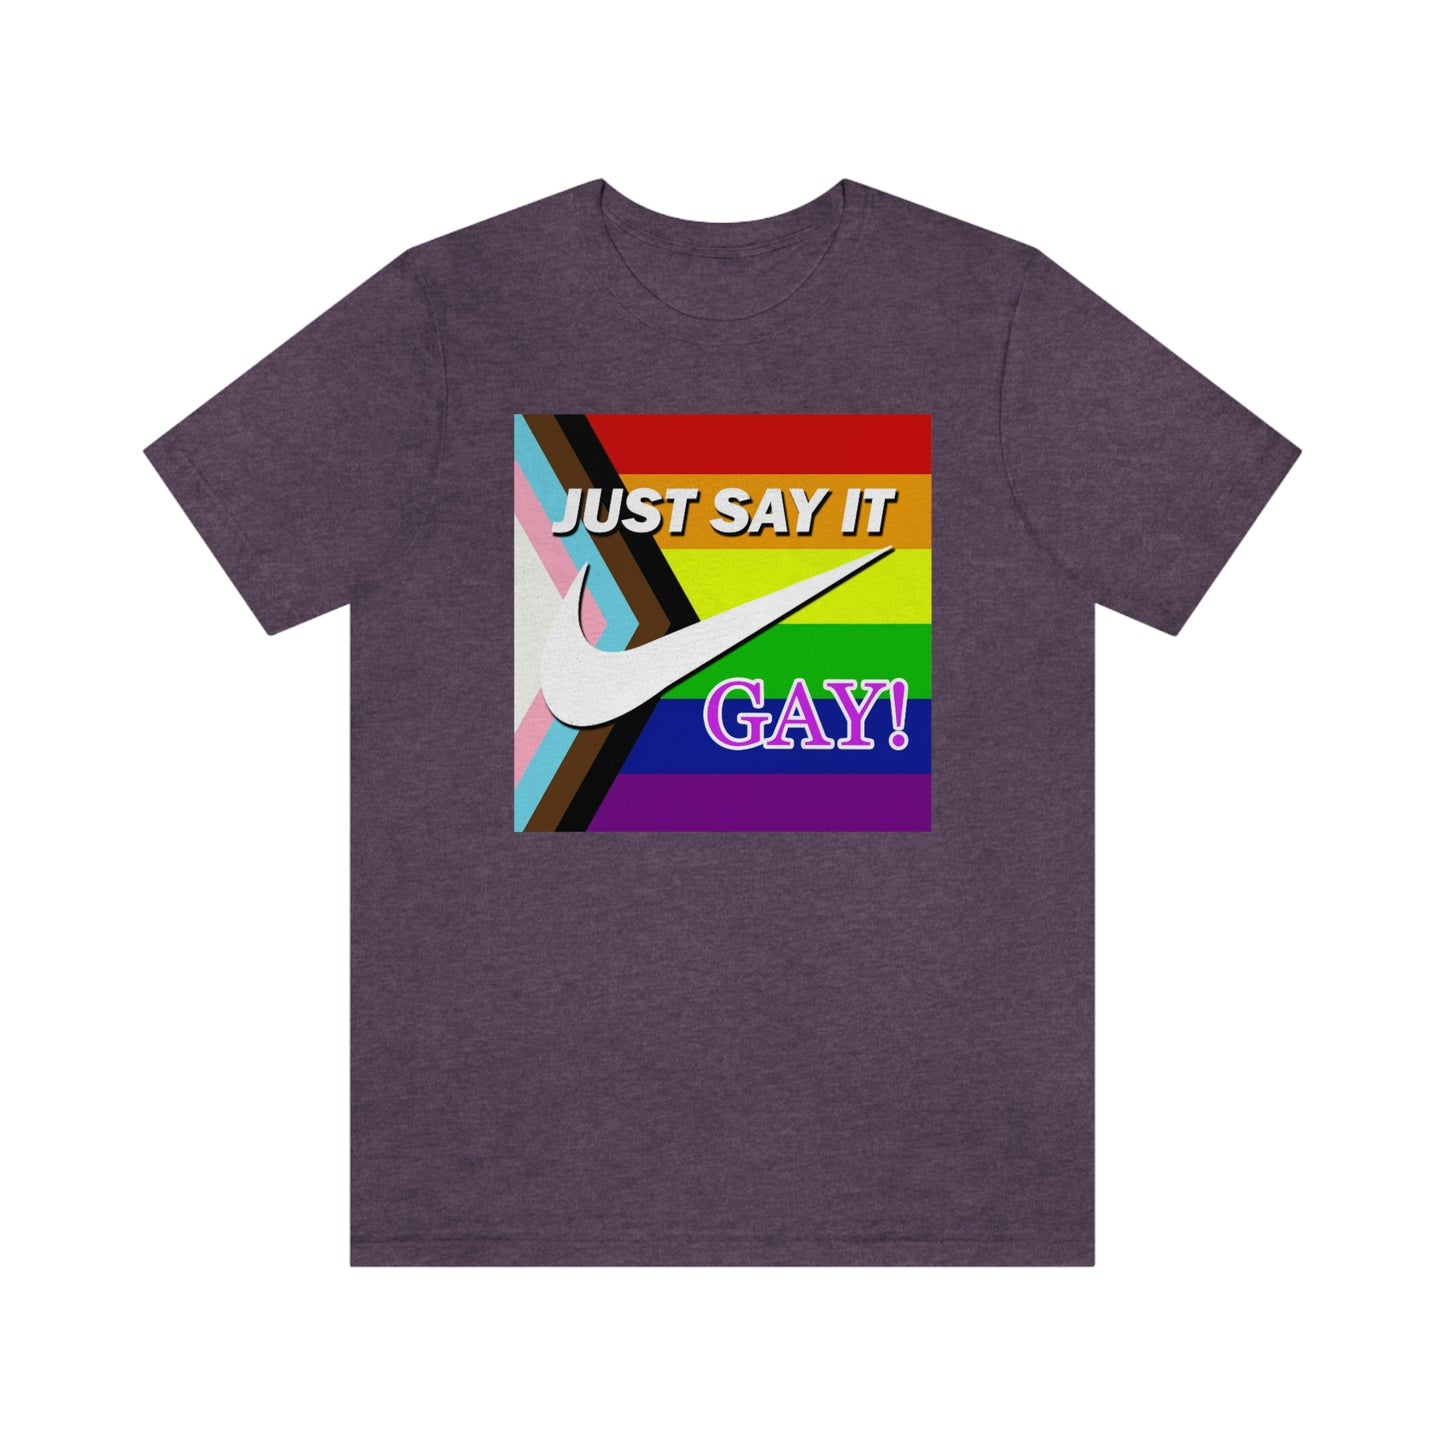 Just Say It - GAY Adult Unisex T-Shirt